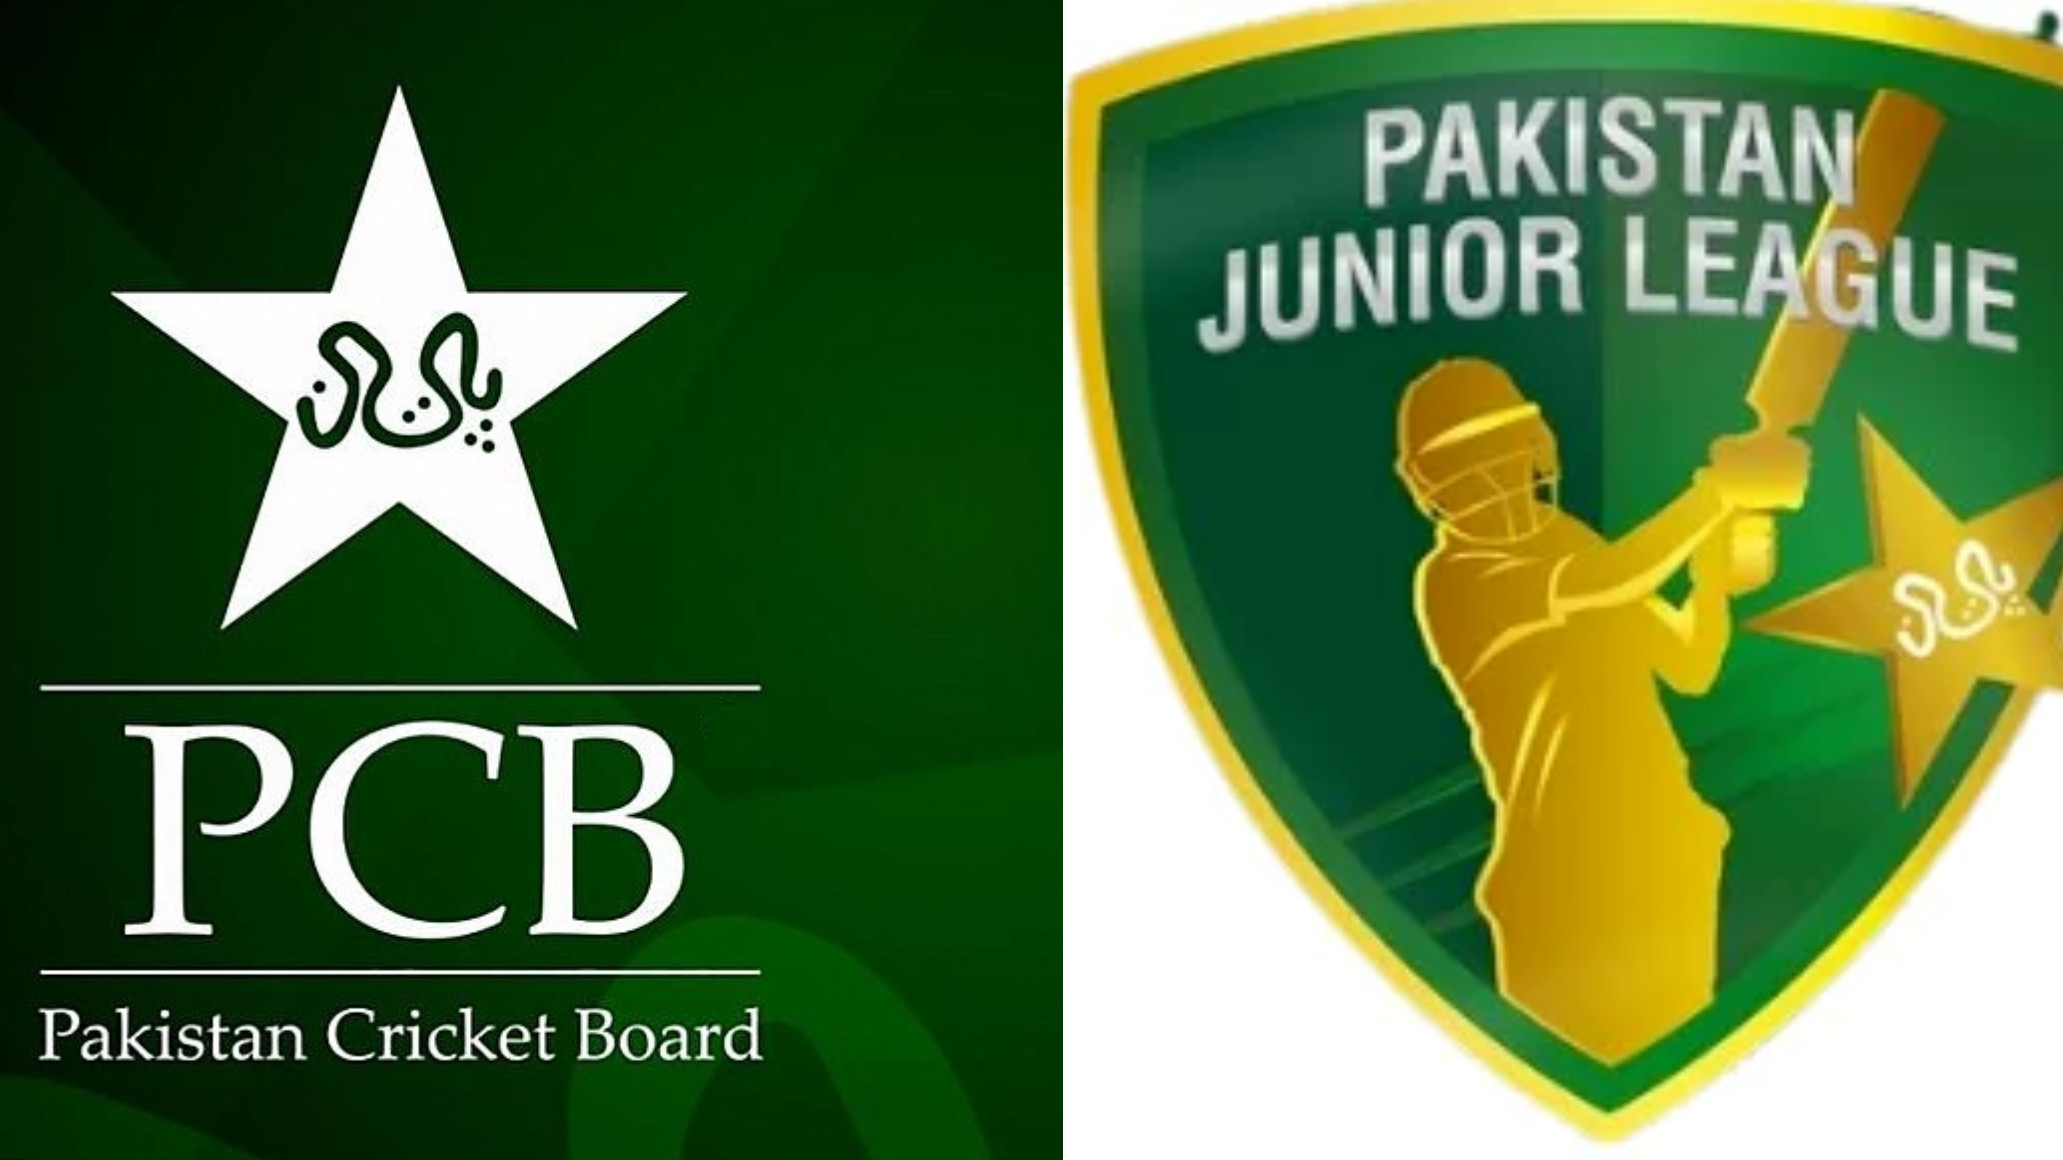 PCB fails to attract bids for team rights in junior T20 league; to manage all six teams on its own